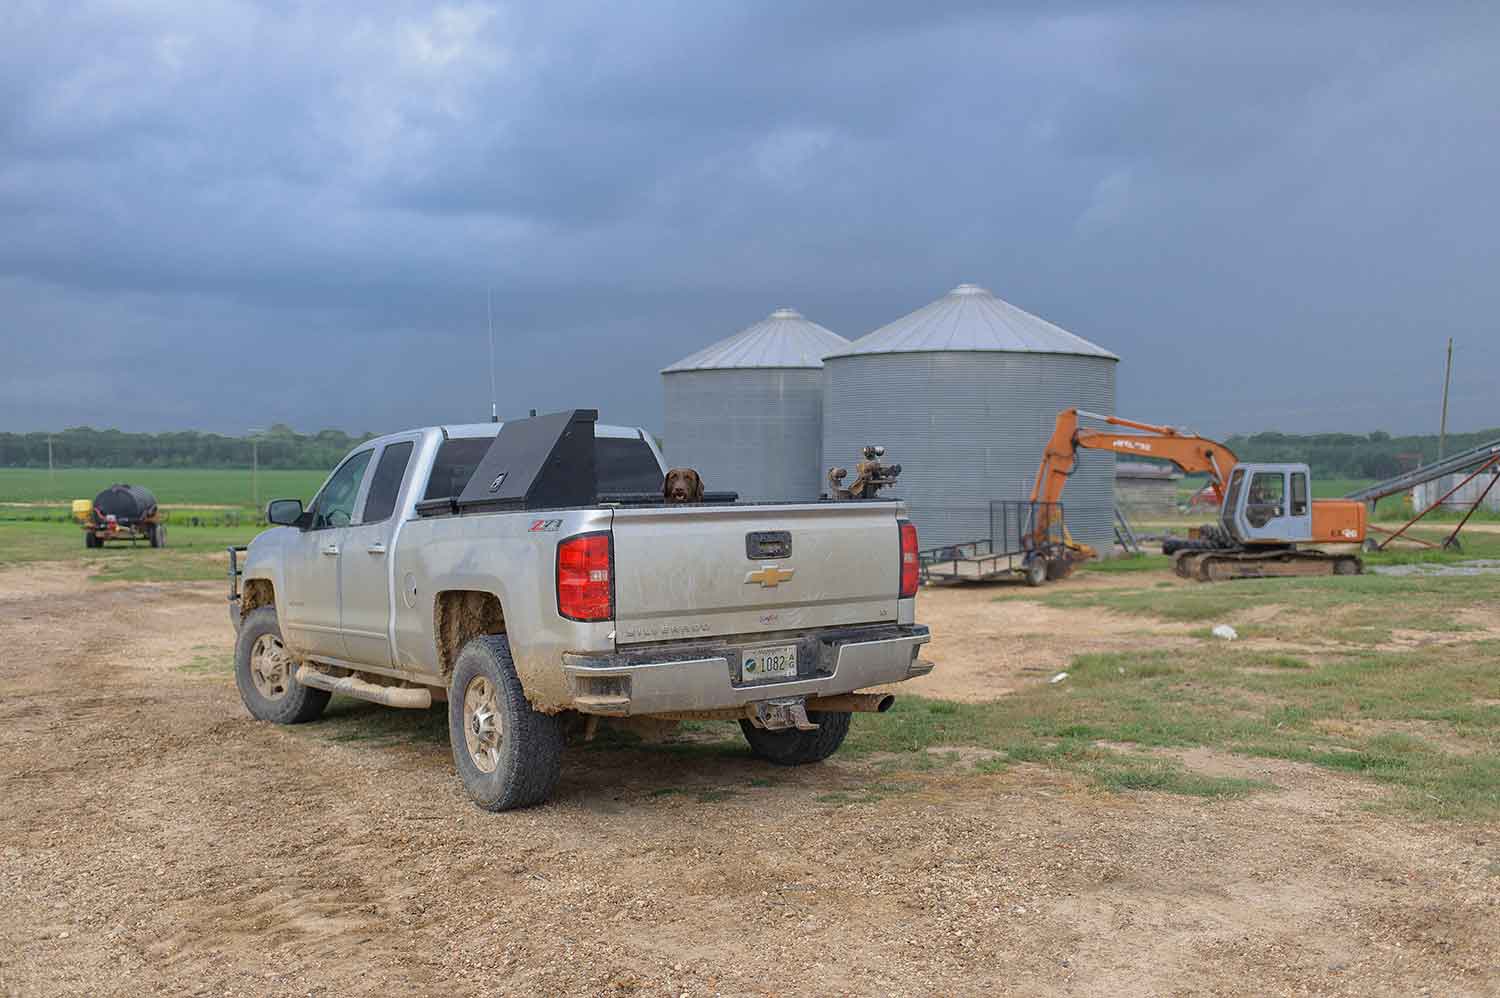 A silver truck with a brown dog peeking its head out of the bed is parked on a dirt lot with farms in the background. Two large, round, metal buildings are just past the truck, and an orange bulldozer is parked in front of one of the metal buildings